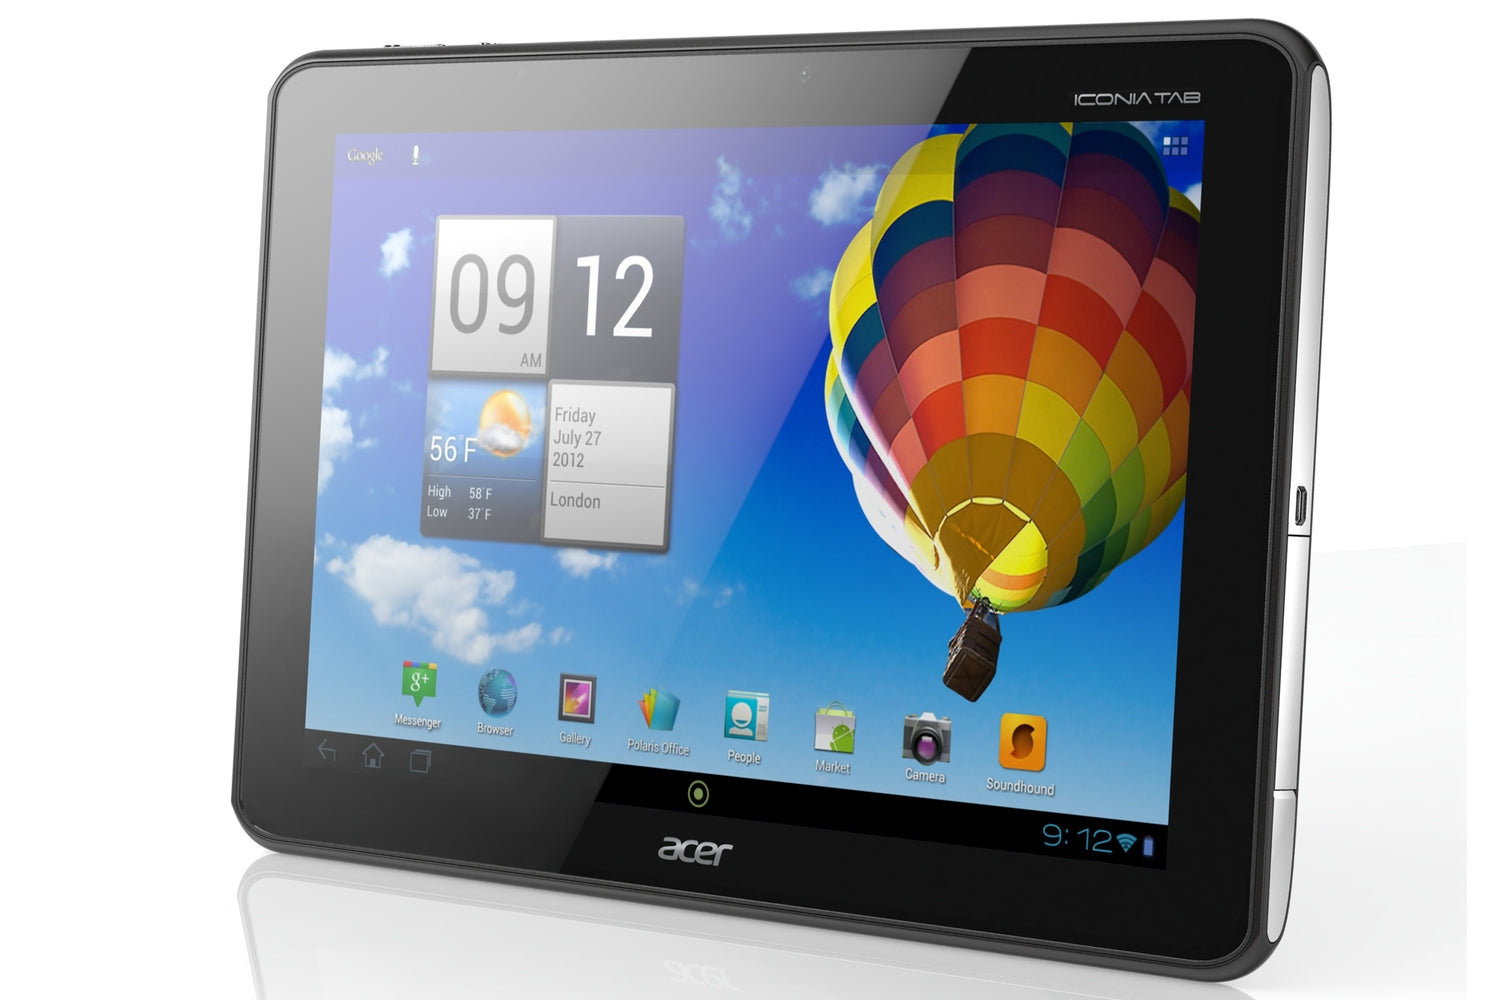 Acer A510 Iconia Tab